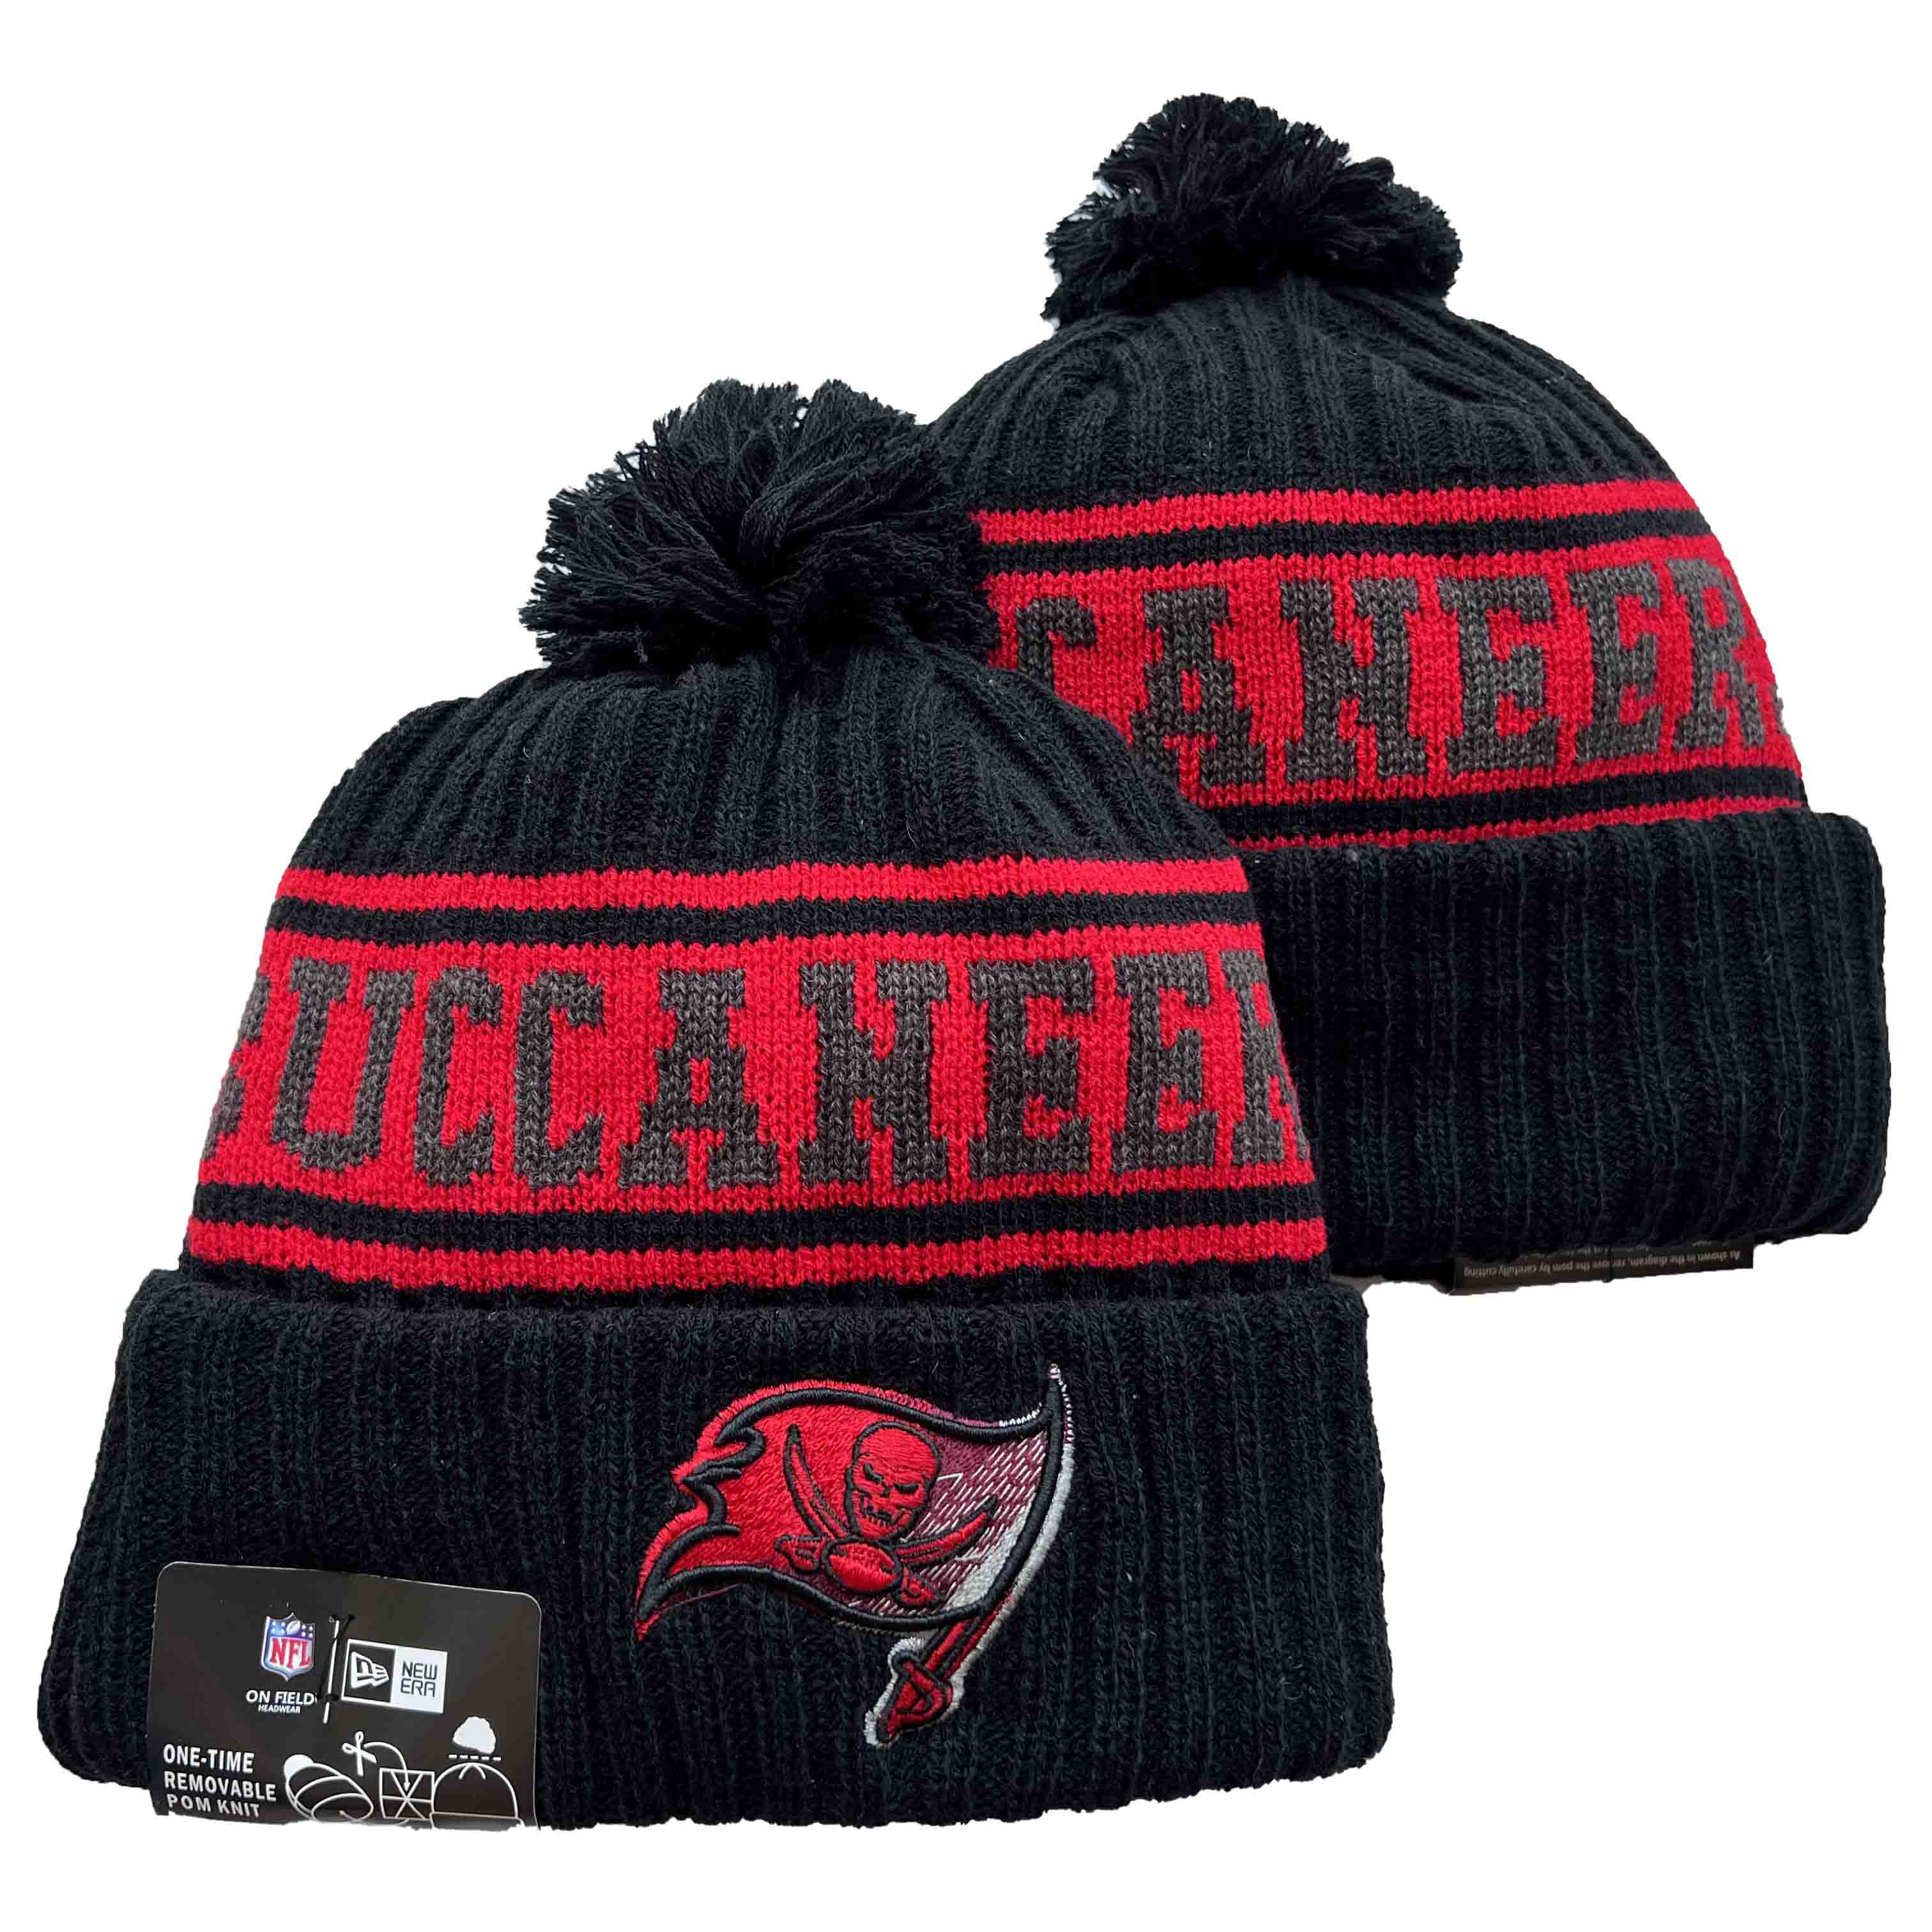 NFL Tampa Bay Buccaneers Beanies Knit Hats-YD1289